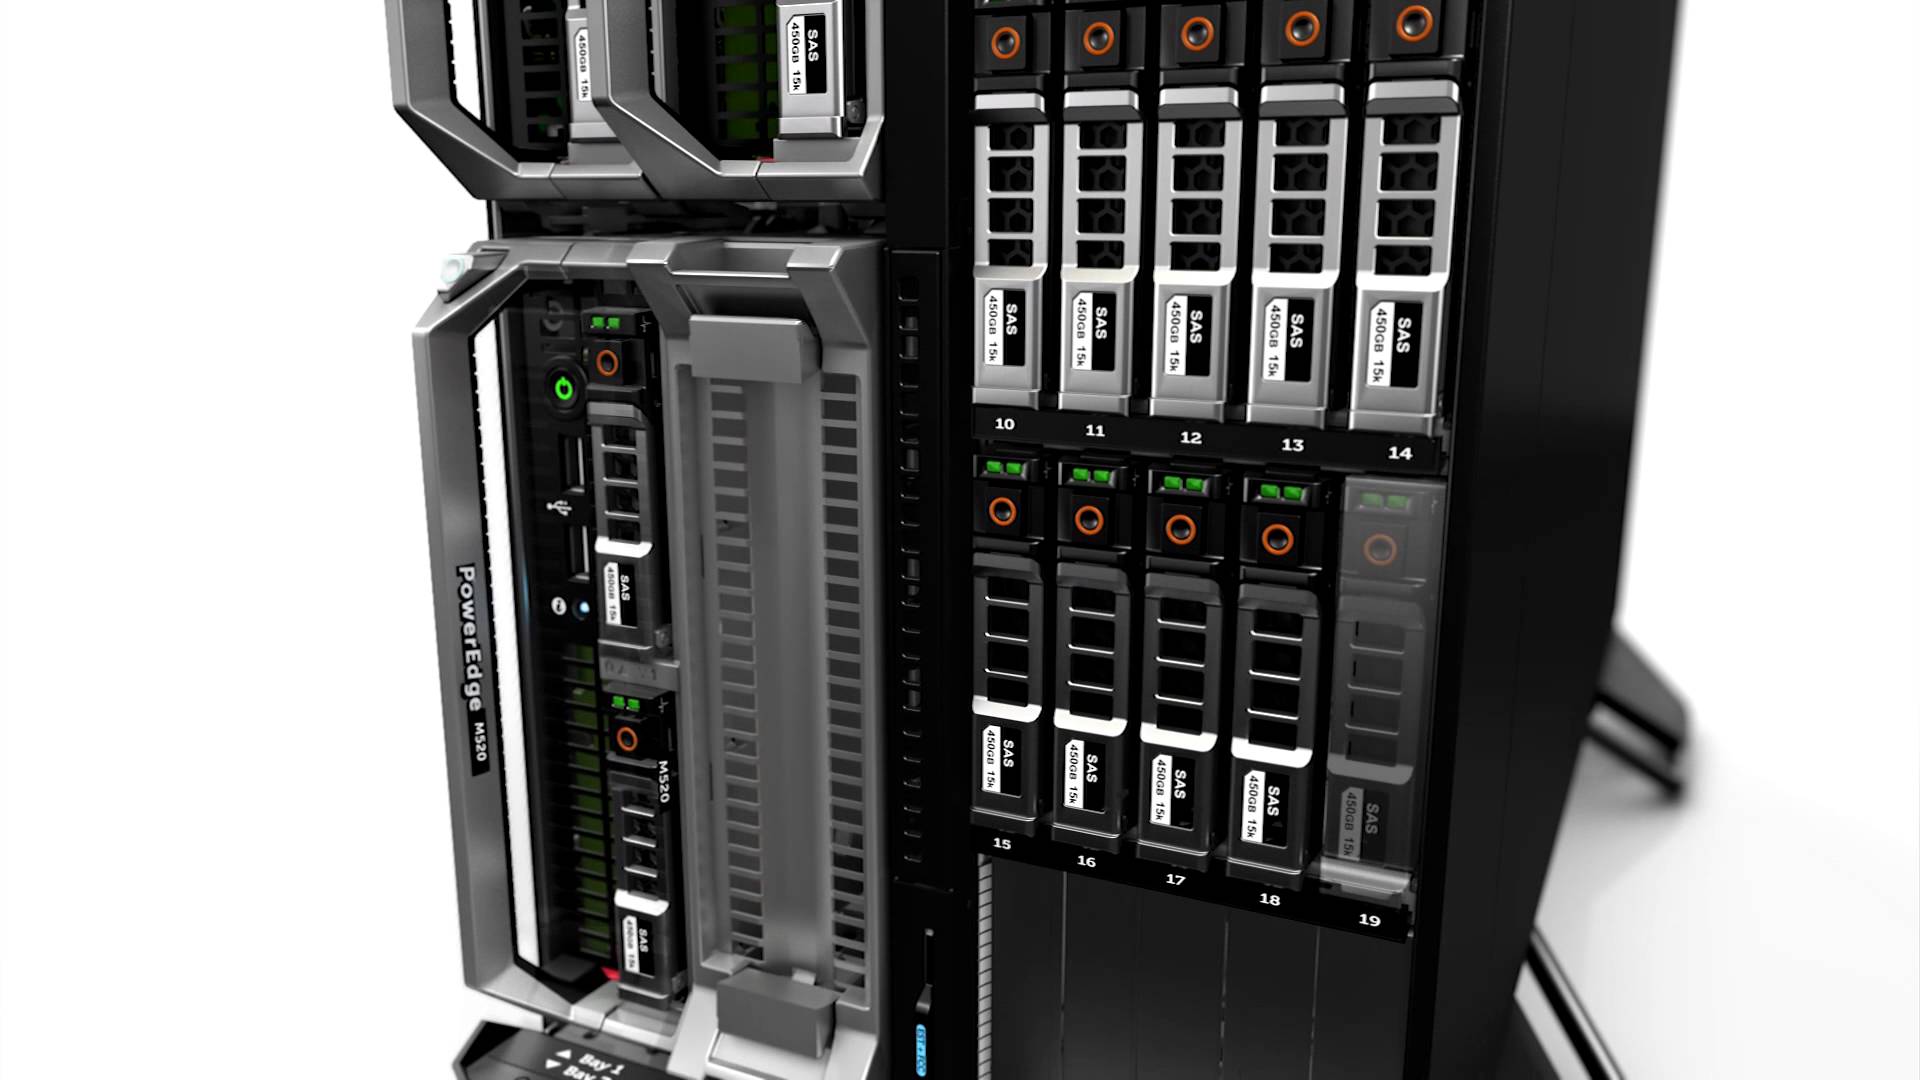 How Superb is Dell’s New VRTX Server?